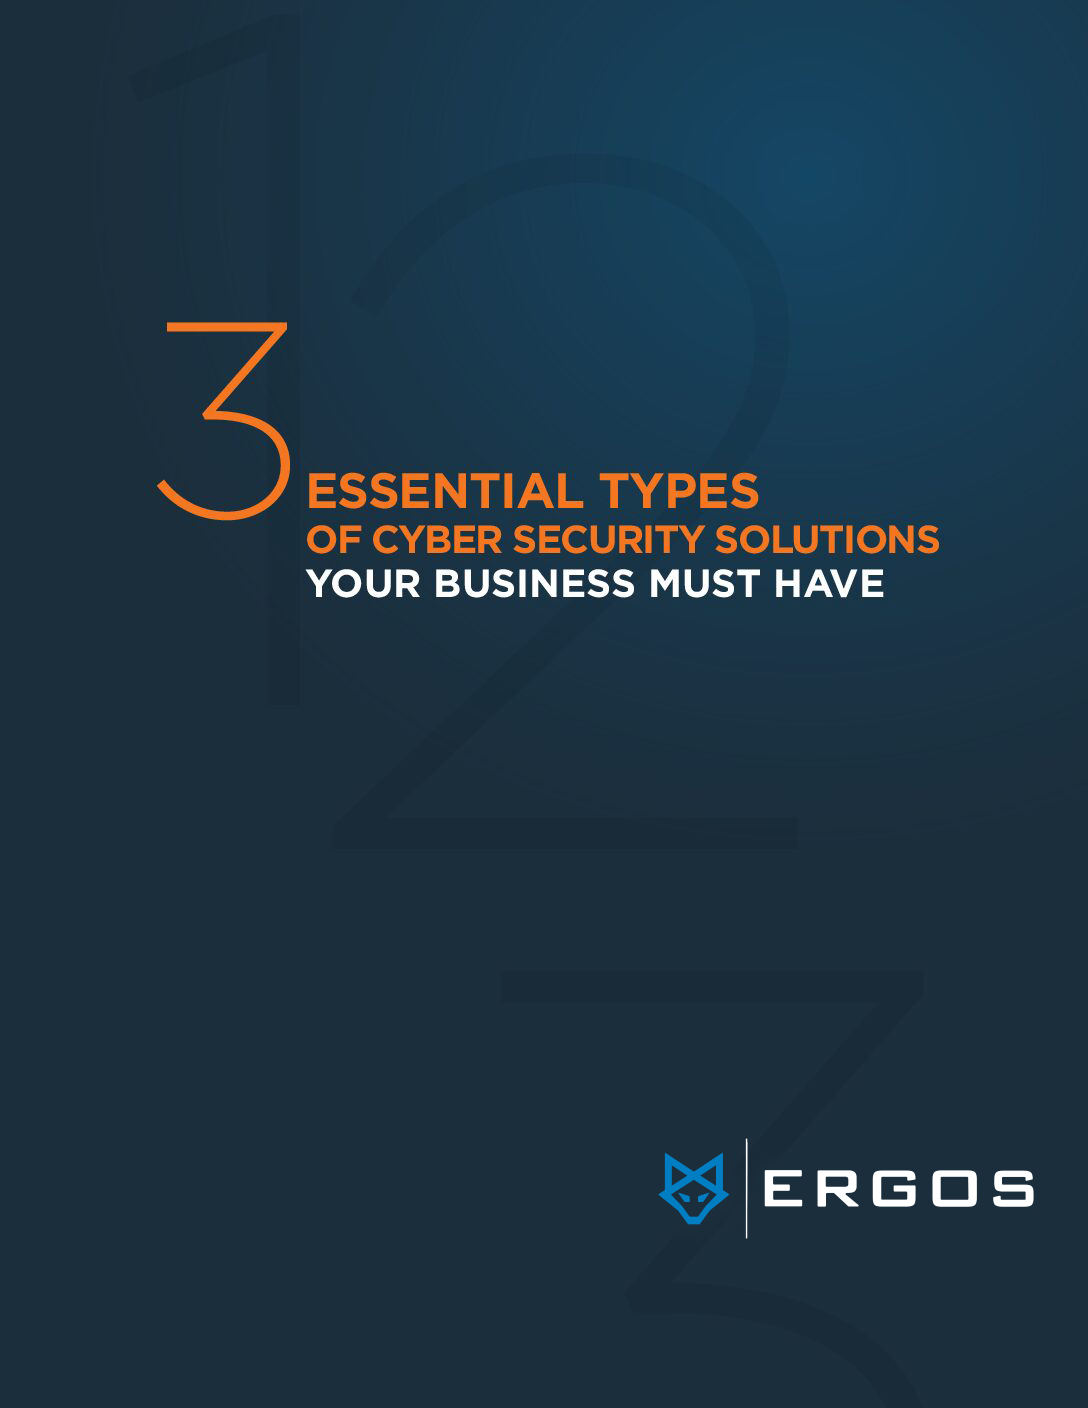 Book cover for "3 Essential Types of Cyber Security Solutions"